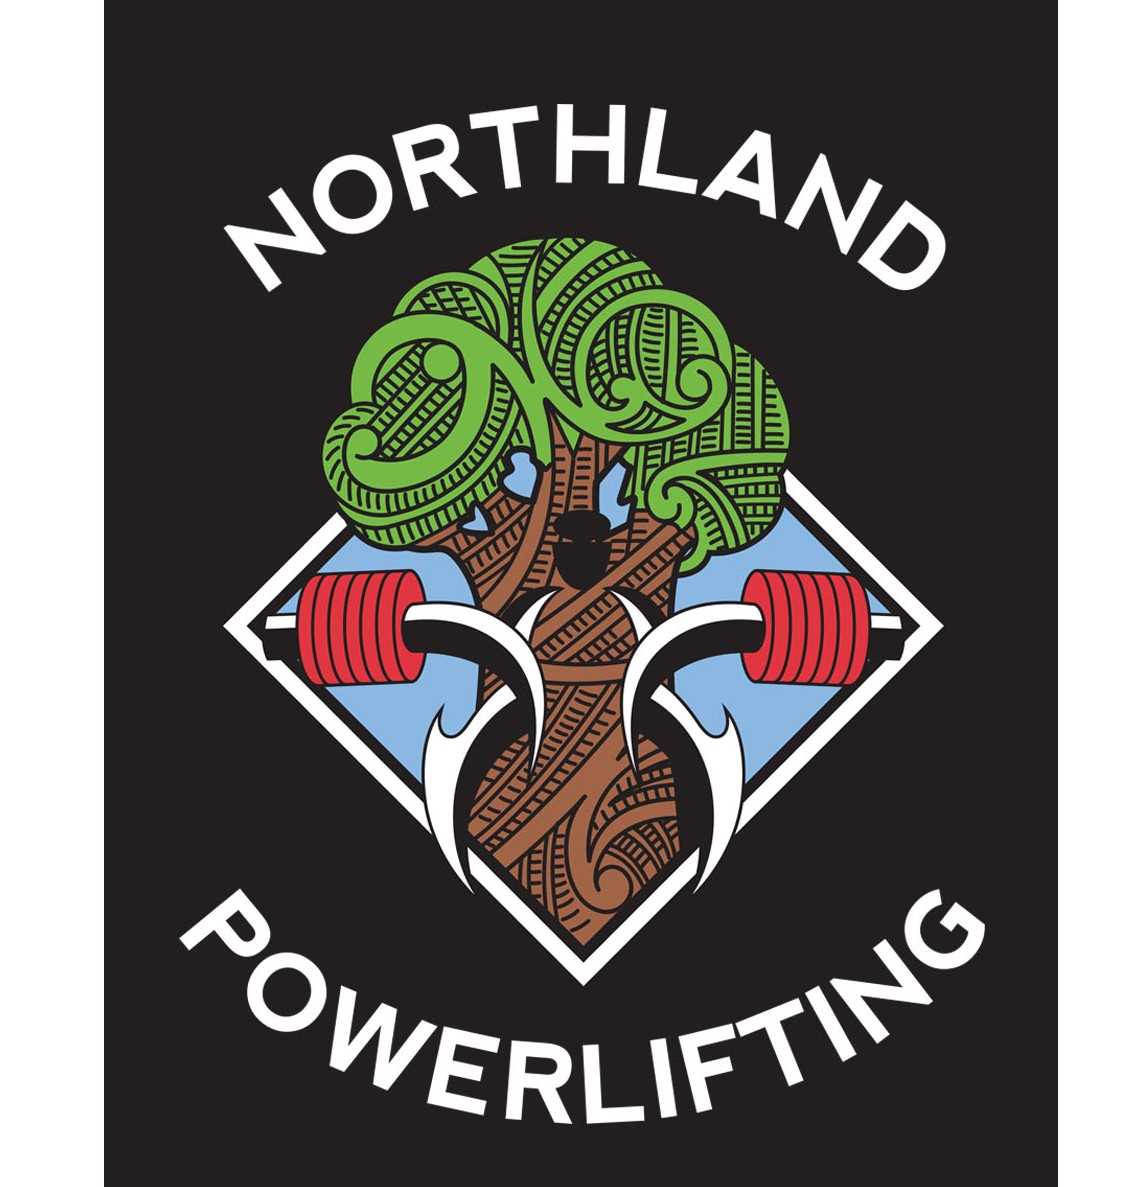 Northland Powerlifting Association - GEAR CHECK, IPF APPROVED LIST &  TECHNICAL RULES